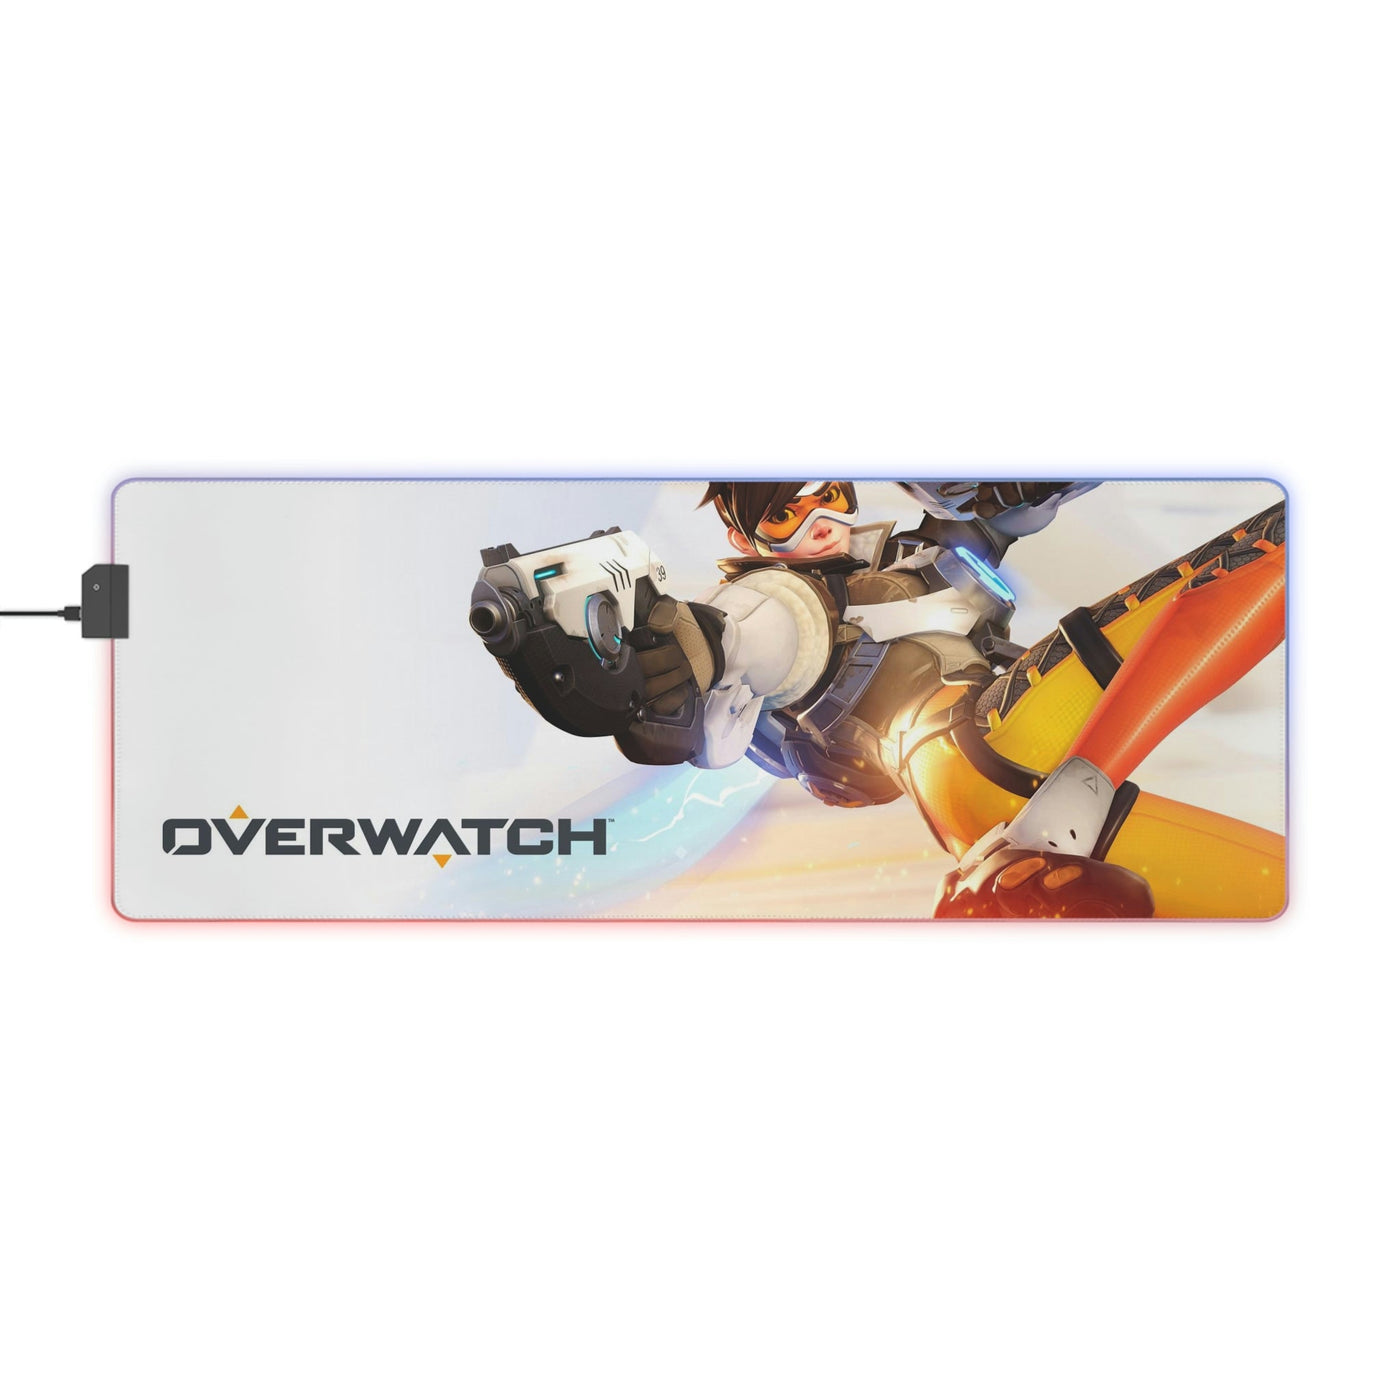 LED Gaming Mouse Pad Overwatch inspired Gapo Goods